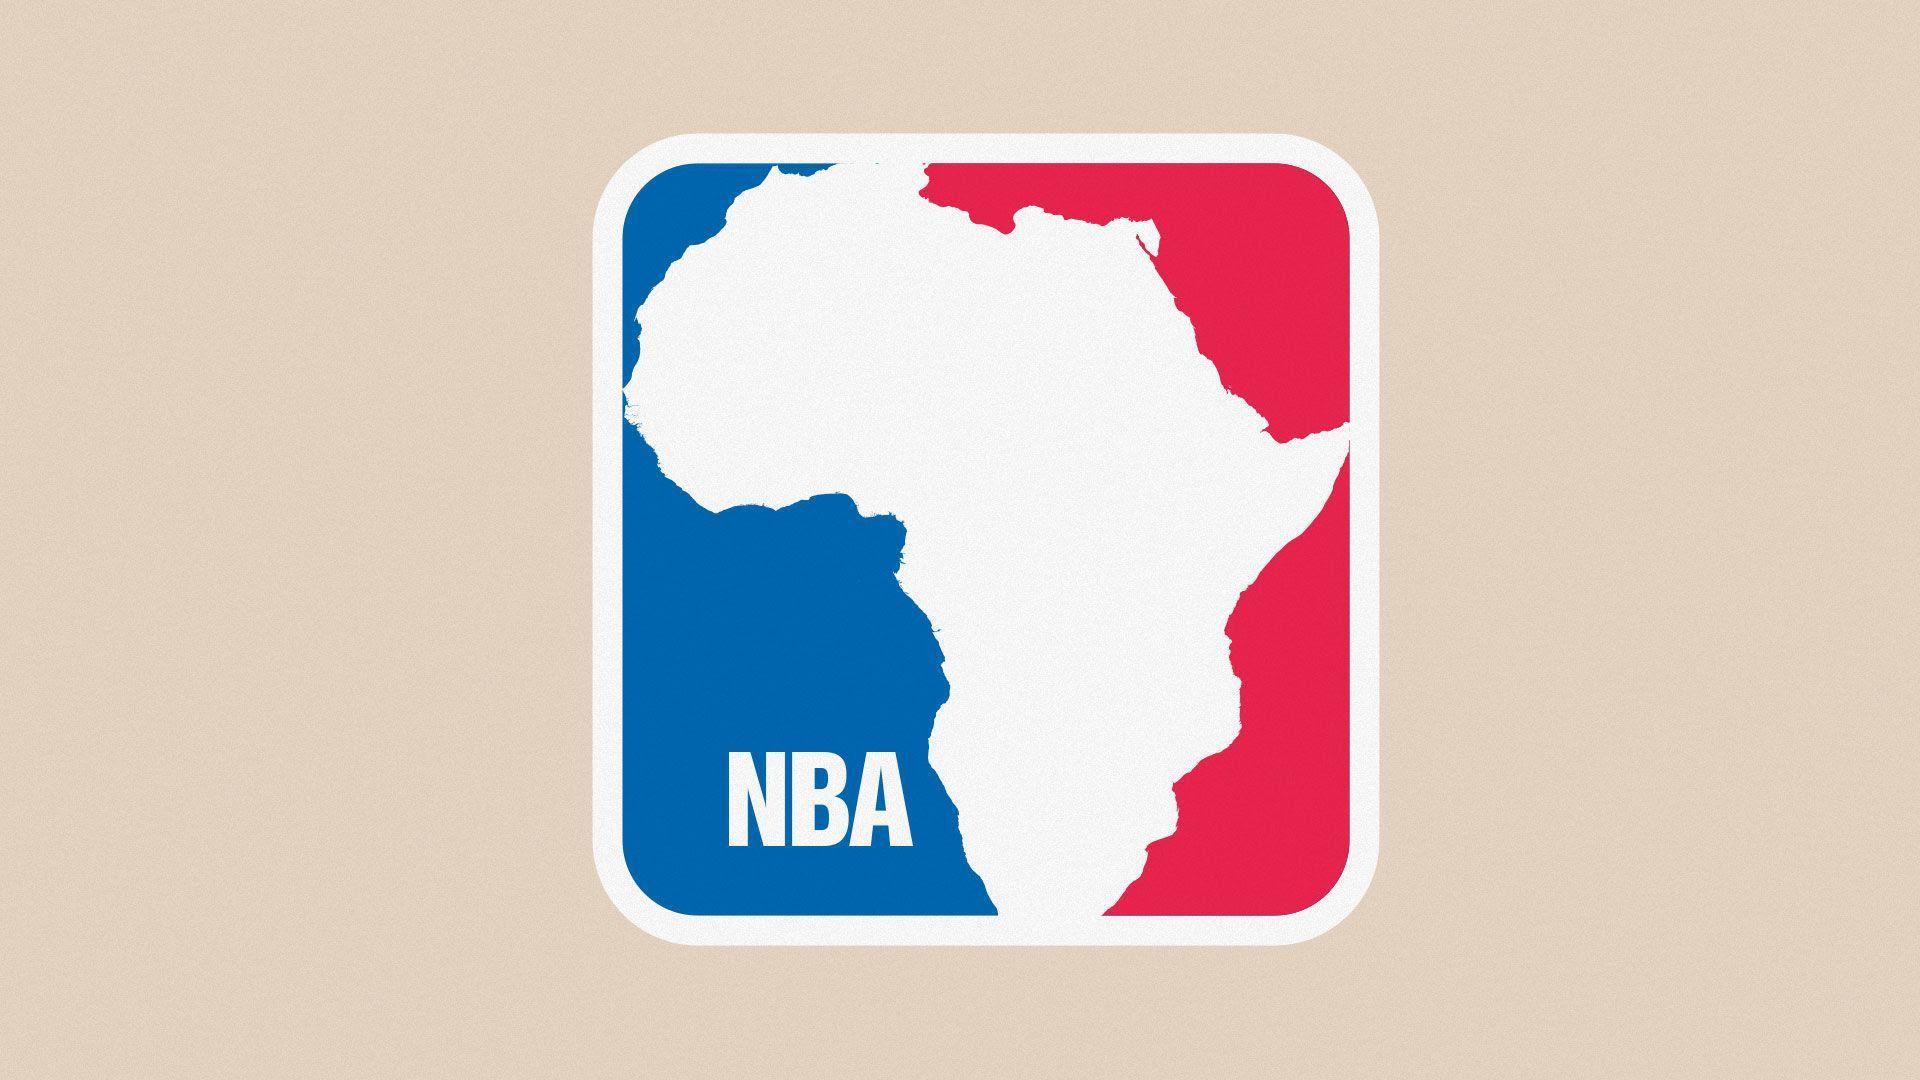 An NBA logo with the outline of Africa.